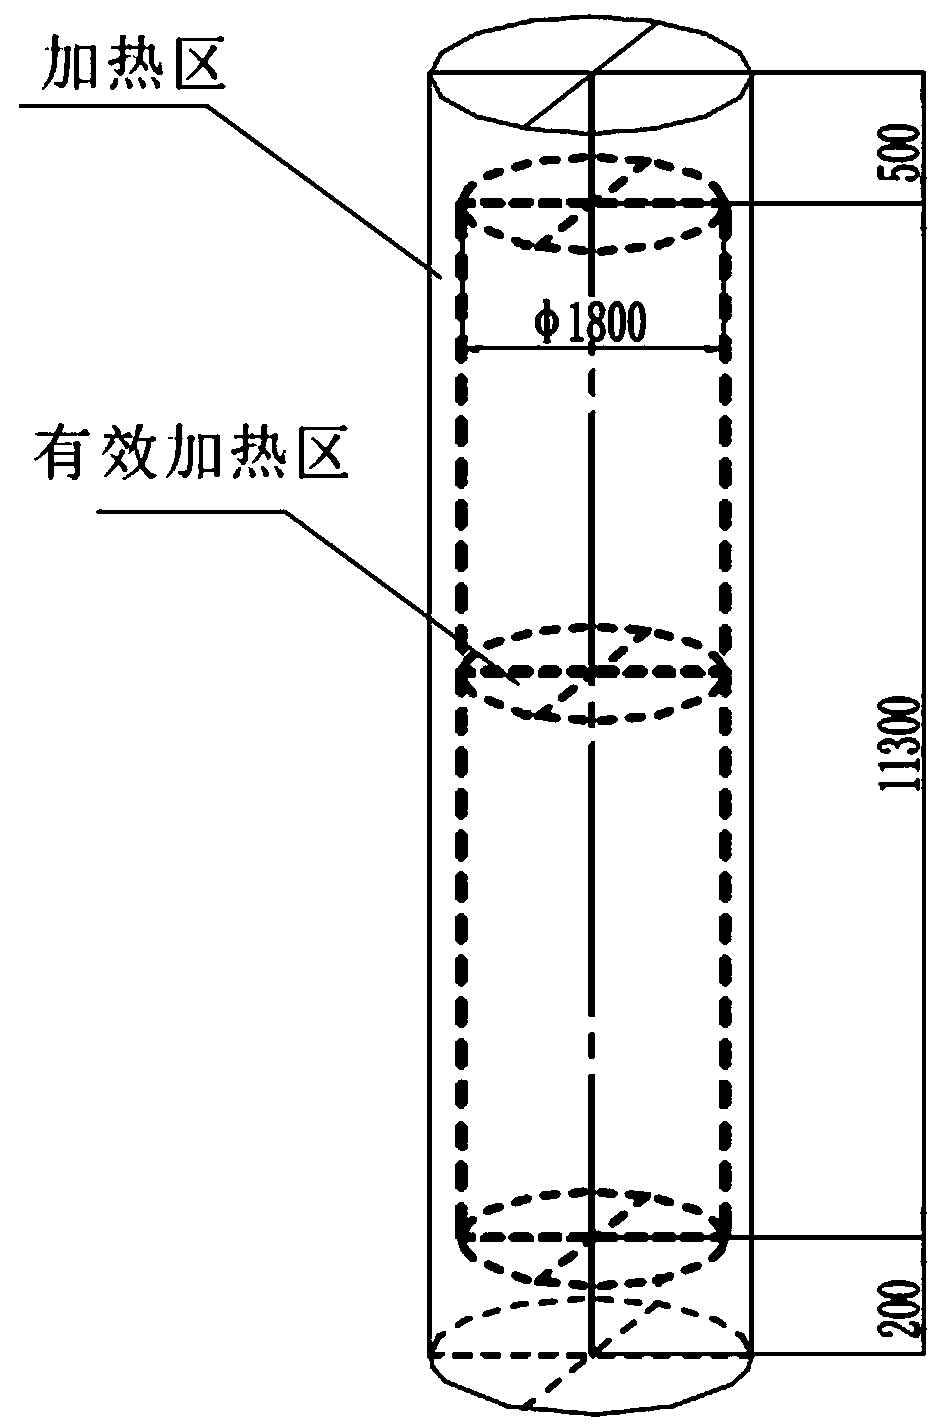 Electric load demand control system and control method for heat treatment resistance furnace group